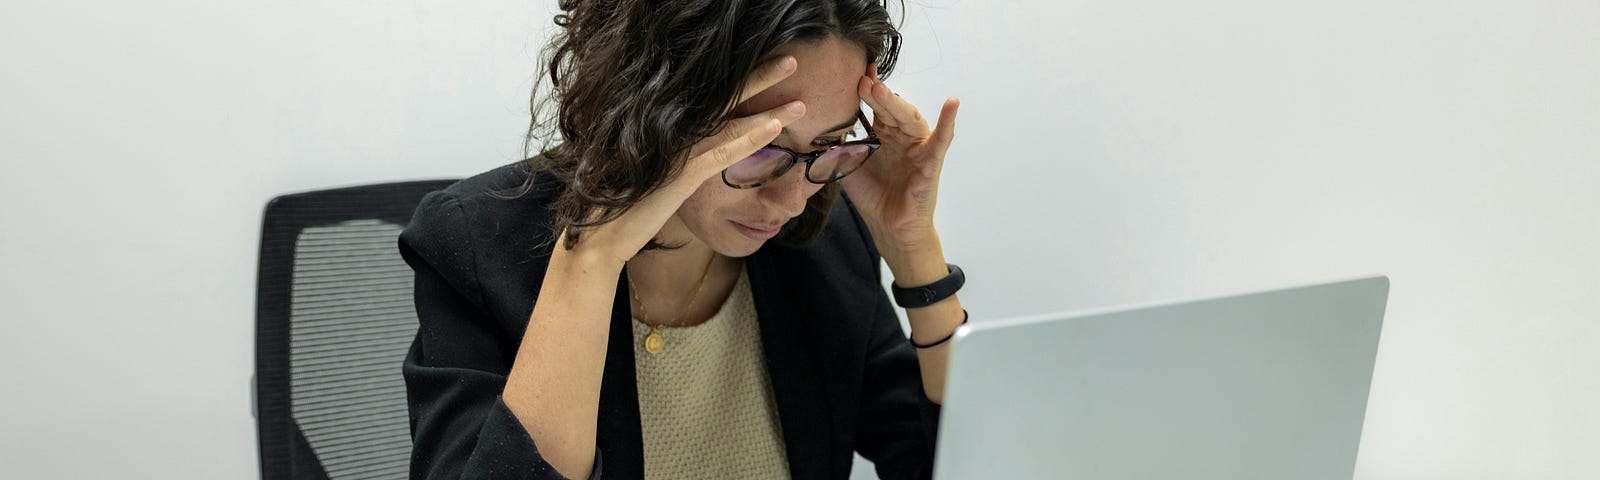 Female worker massaging her headache while staring at a laptop screen.